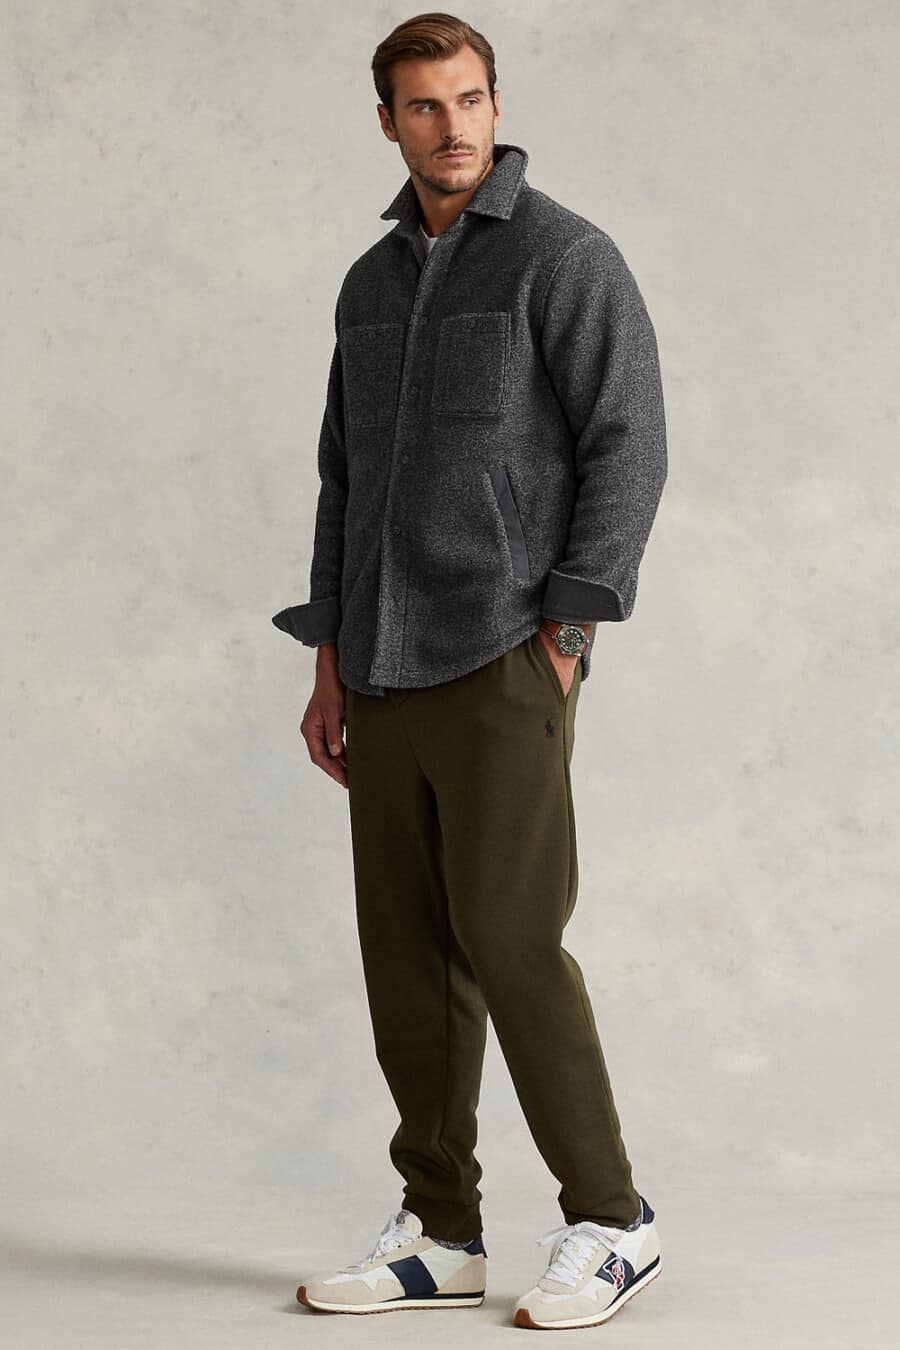 Men's dark green sweatpants, charcoal flannel overshirt and retro running sneakers outfit